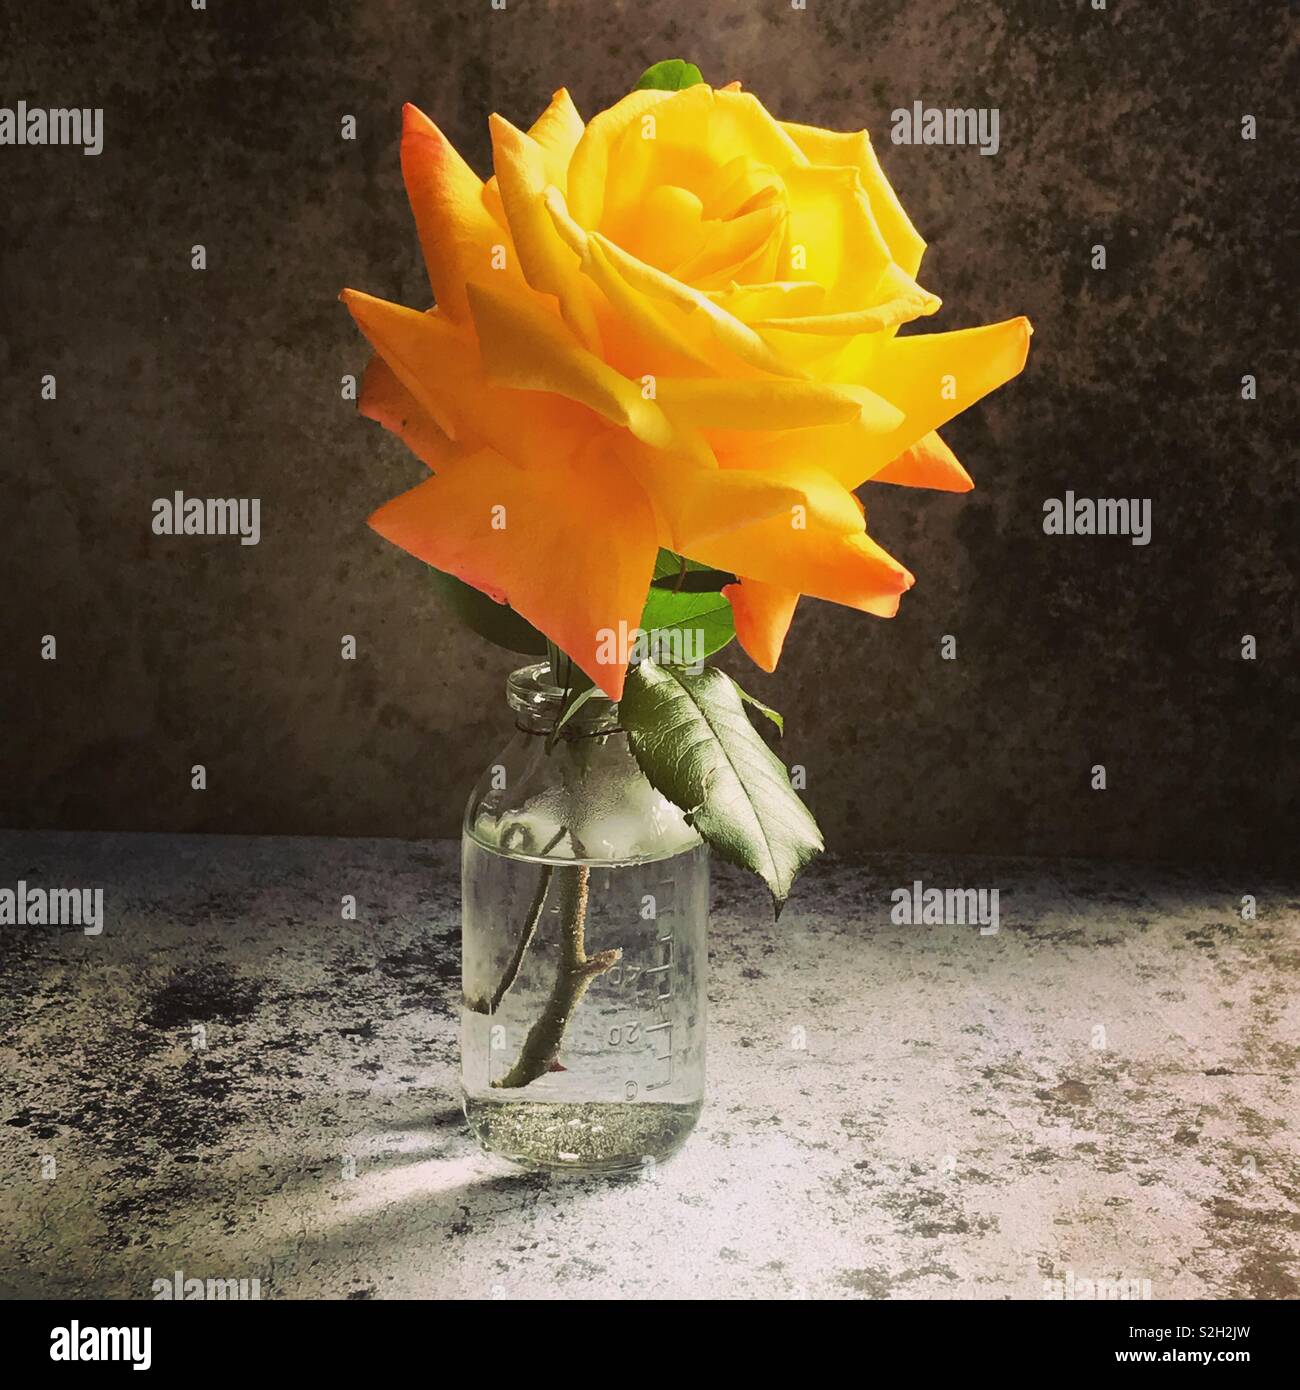 Download Beautiful Yellow Rose In A Simple Glass Jar Stock Photo Alamy Yellowimages Mockups